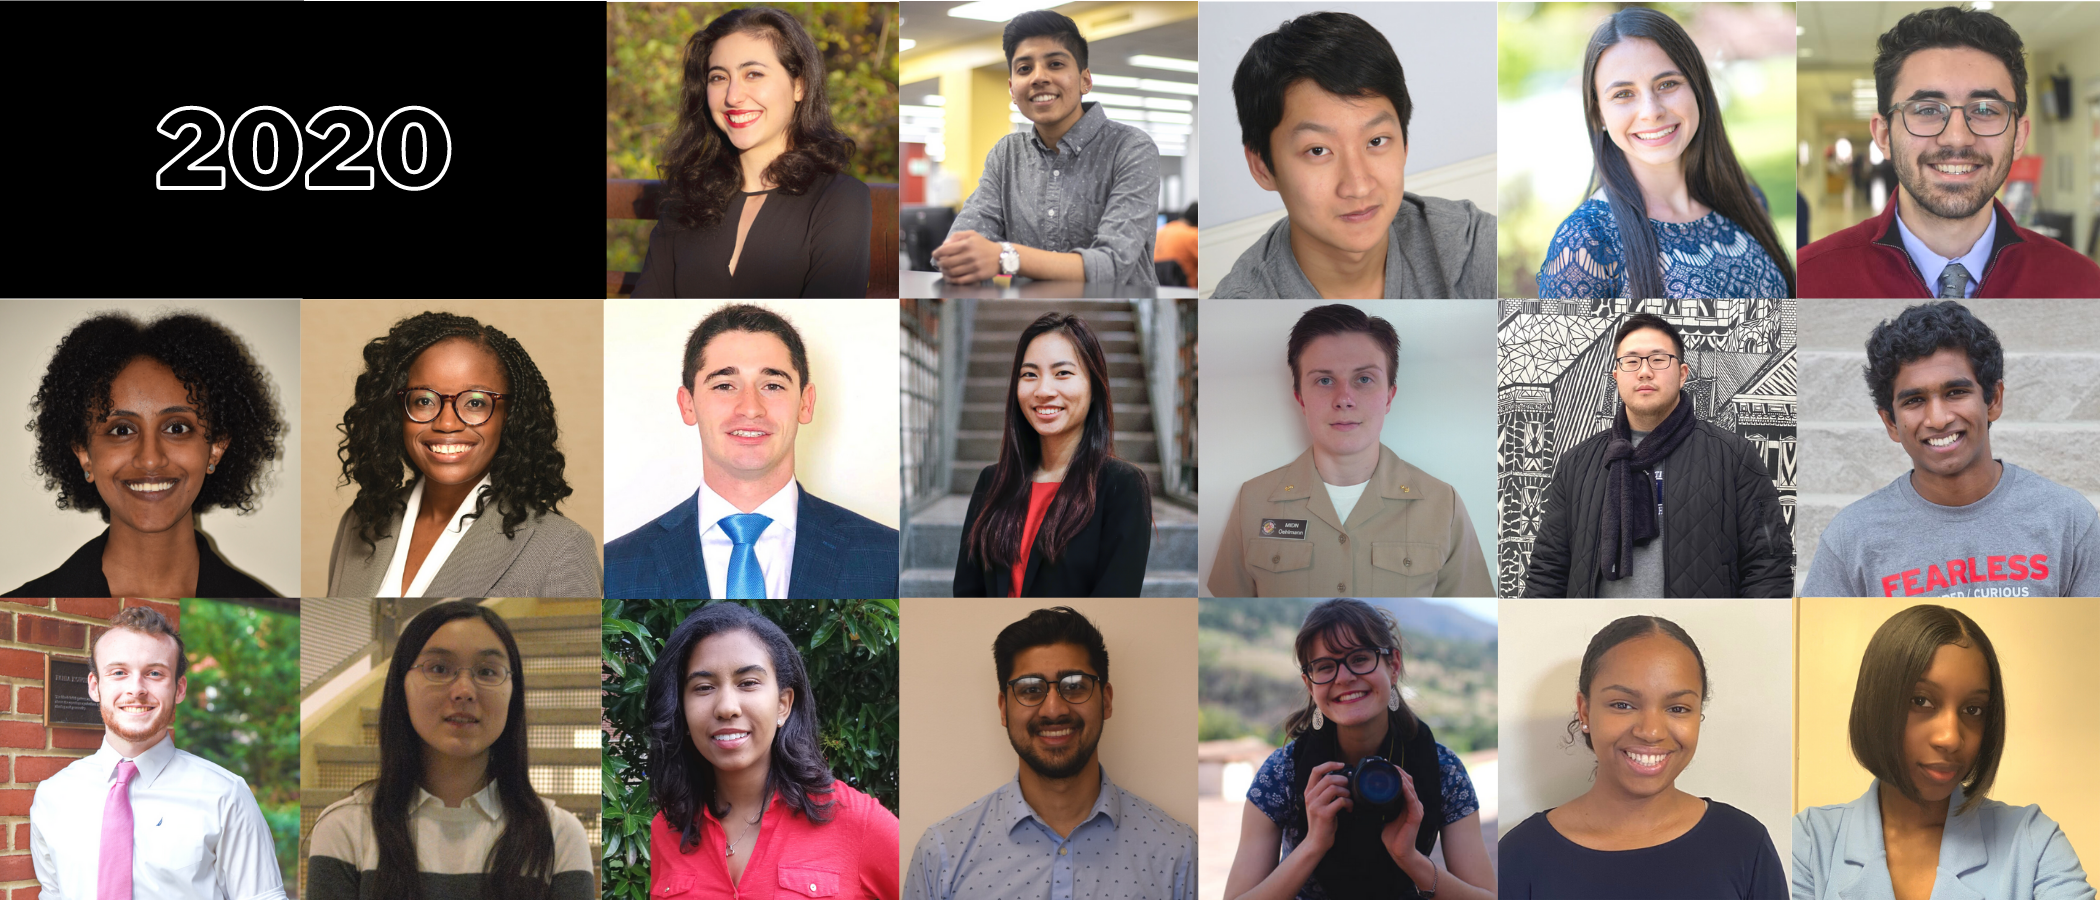 Merrill 2020 Scholars photo collage, 7 by 3 grid